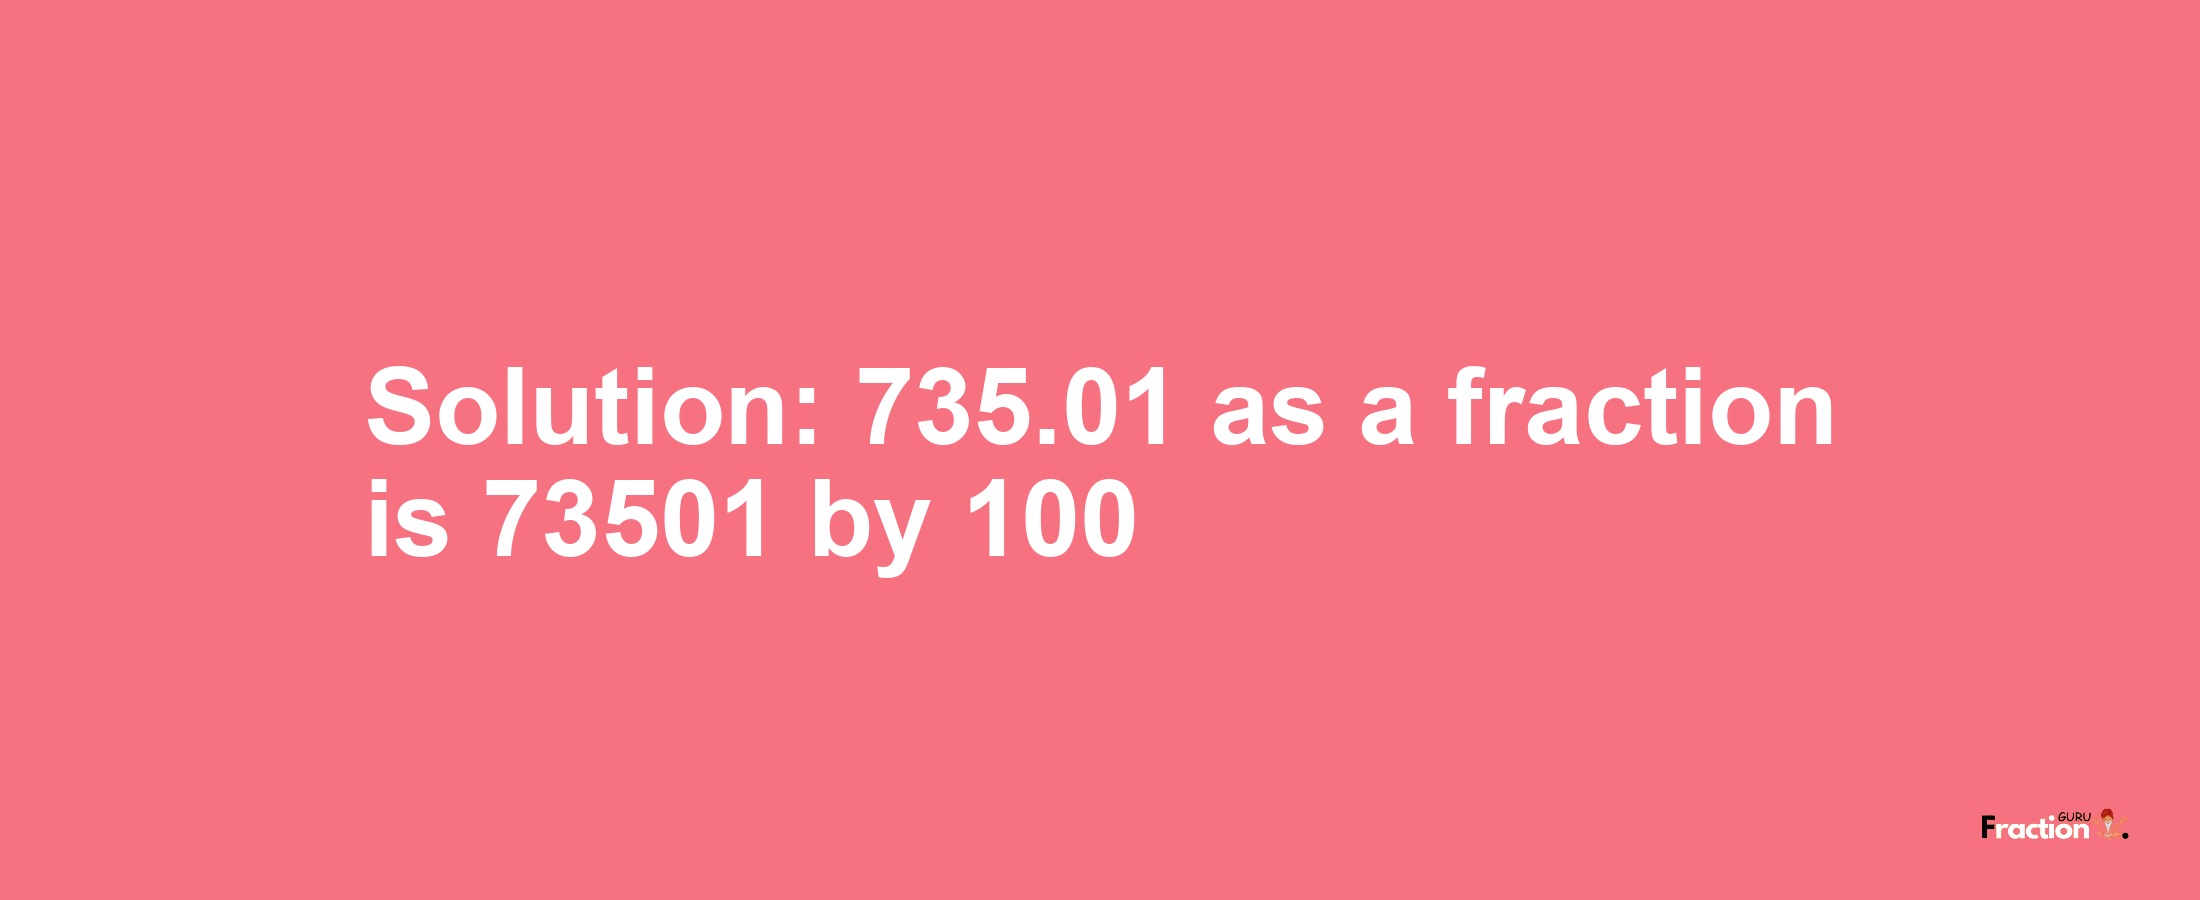 Solution:735.01 as a fraction is 73501/100